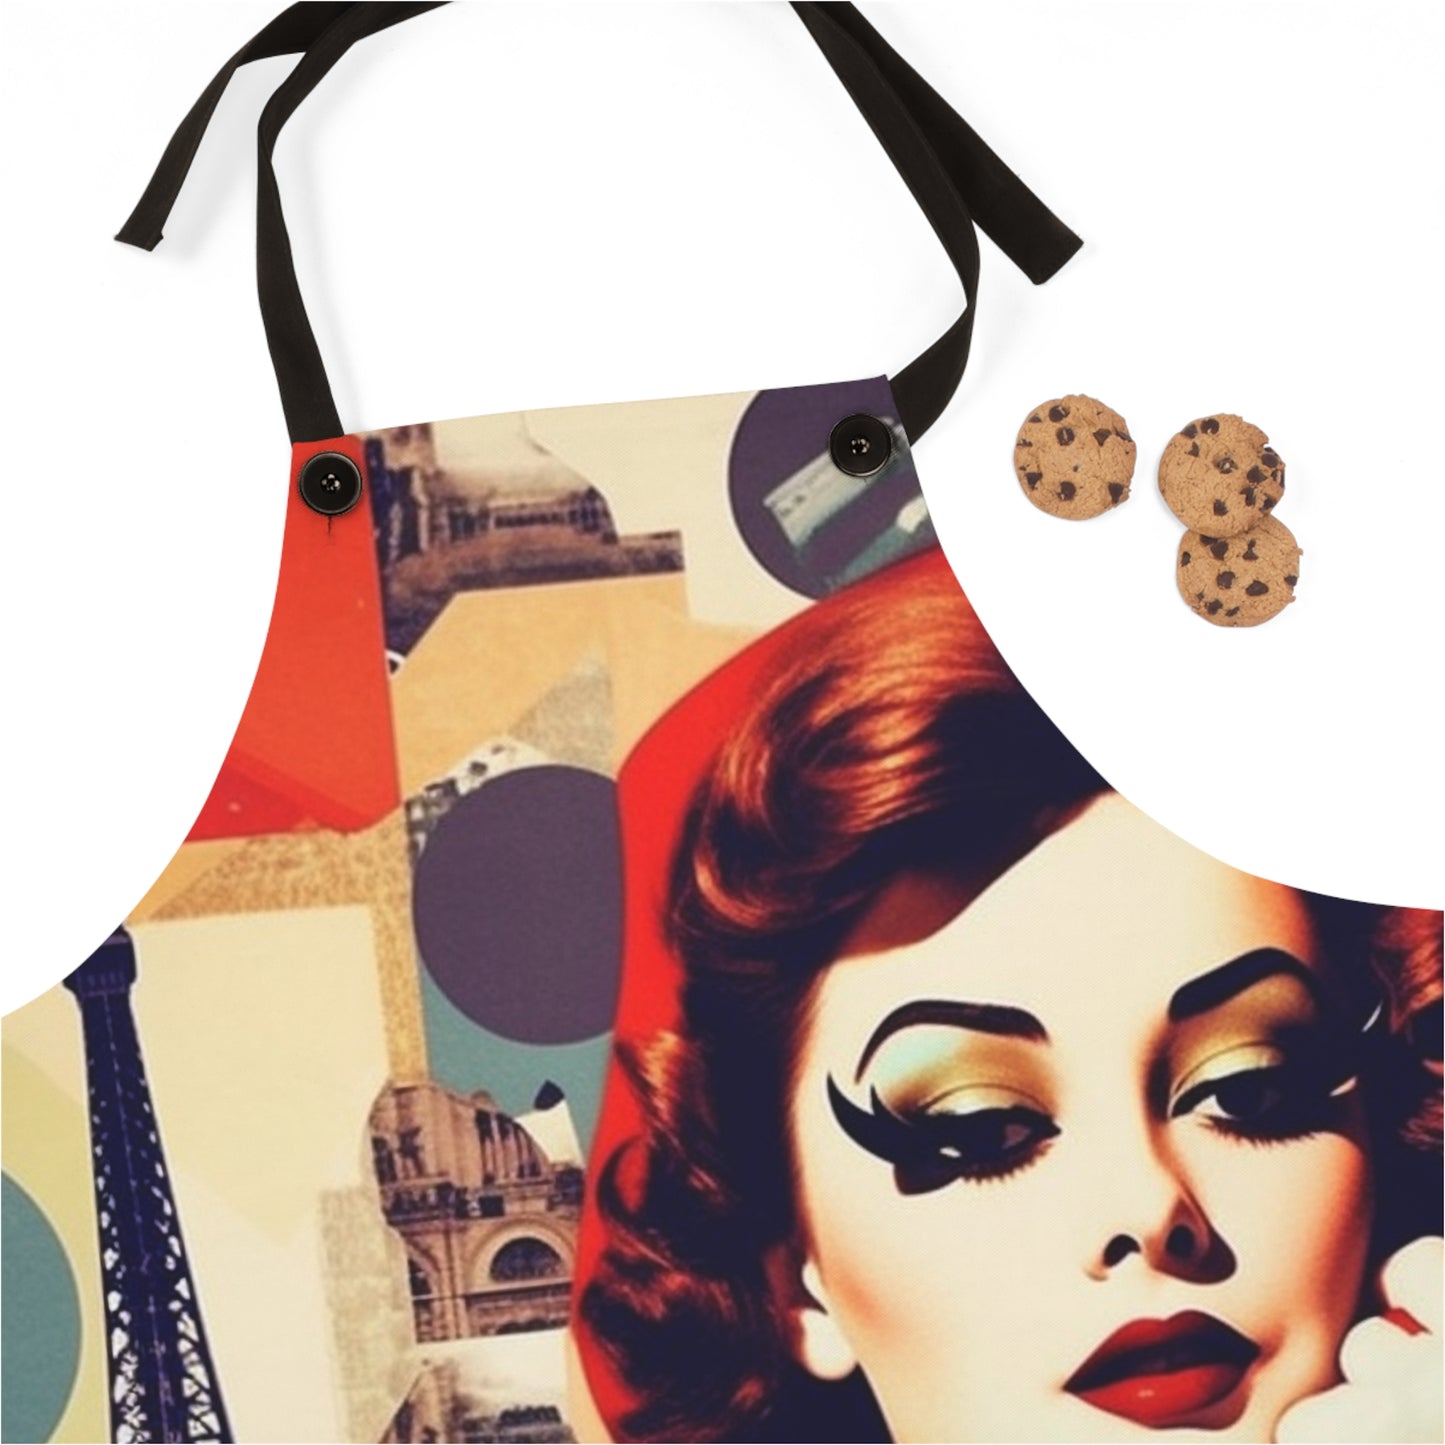 LA MODE Chef APRON, French Couture, Pop Art, Travel, Fashion, Gourmet, Cuisine, Cook, France, must have gift item